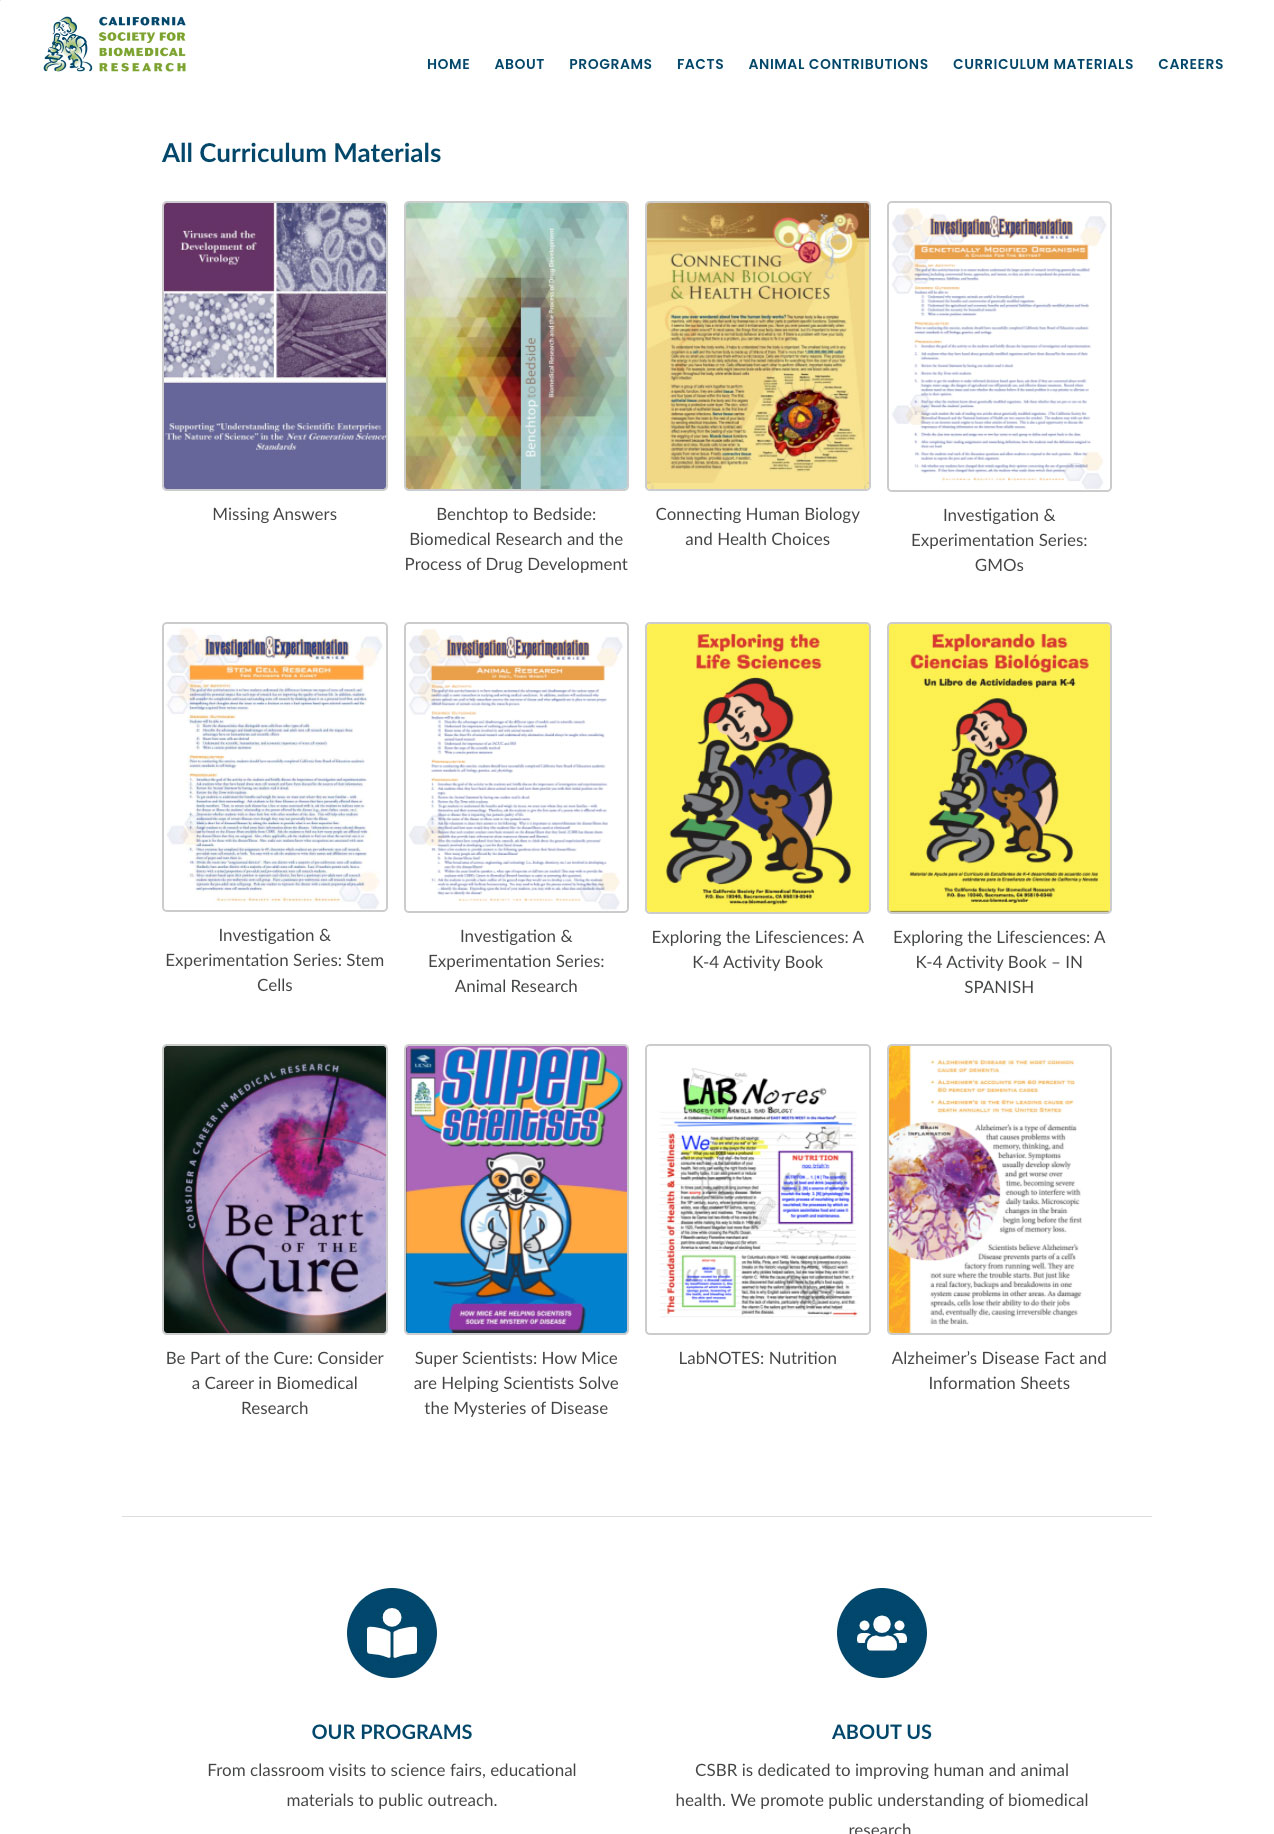 All Curriculum Materials Page